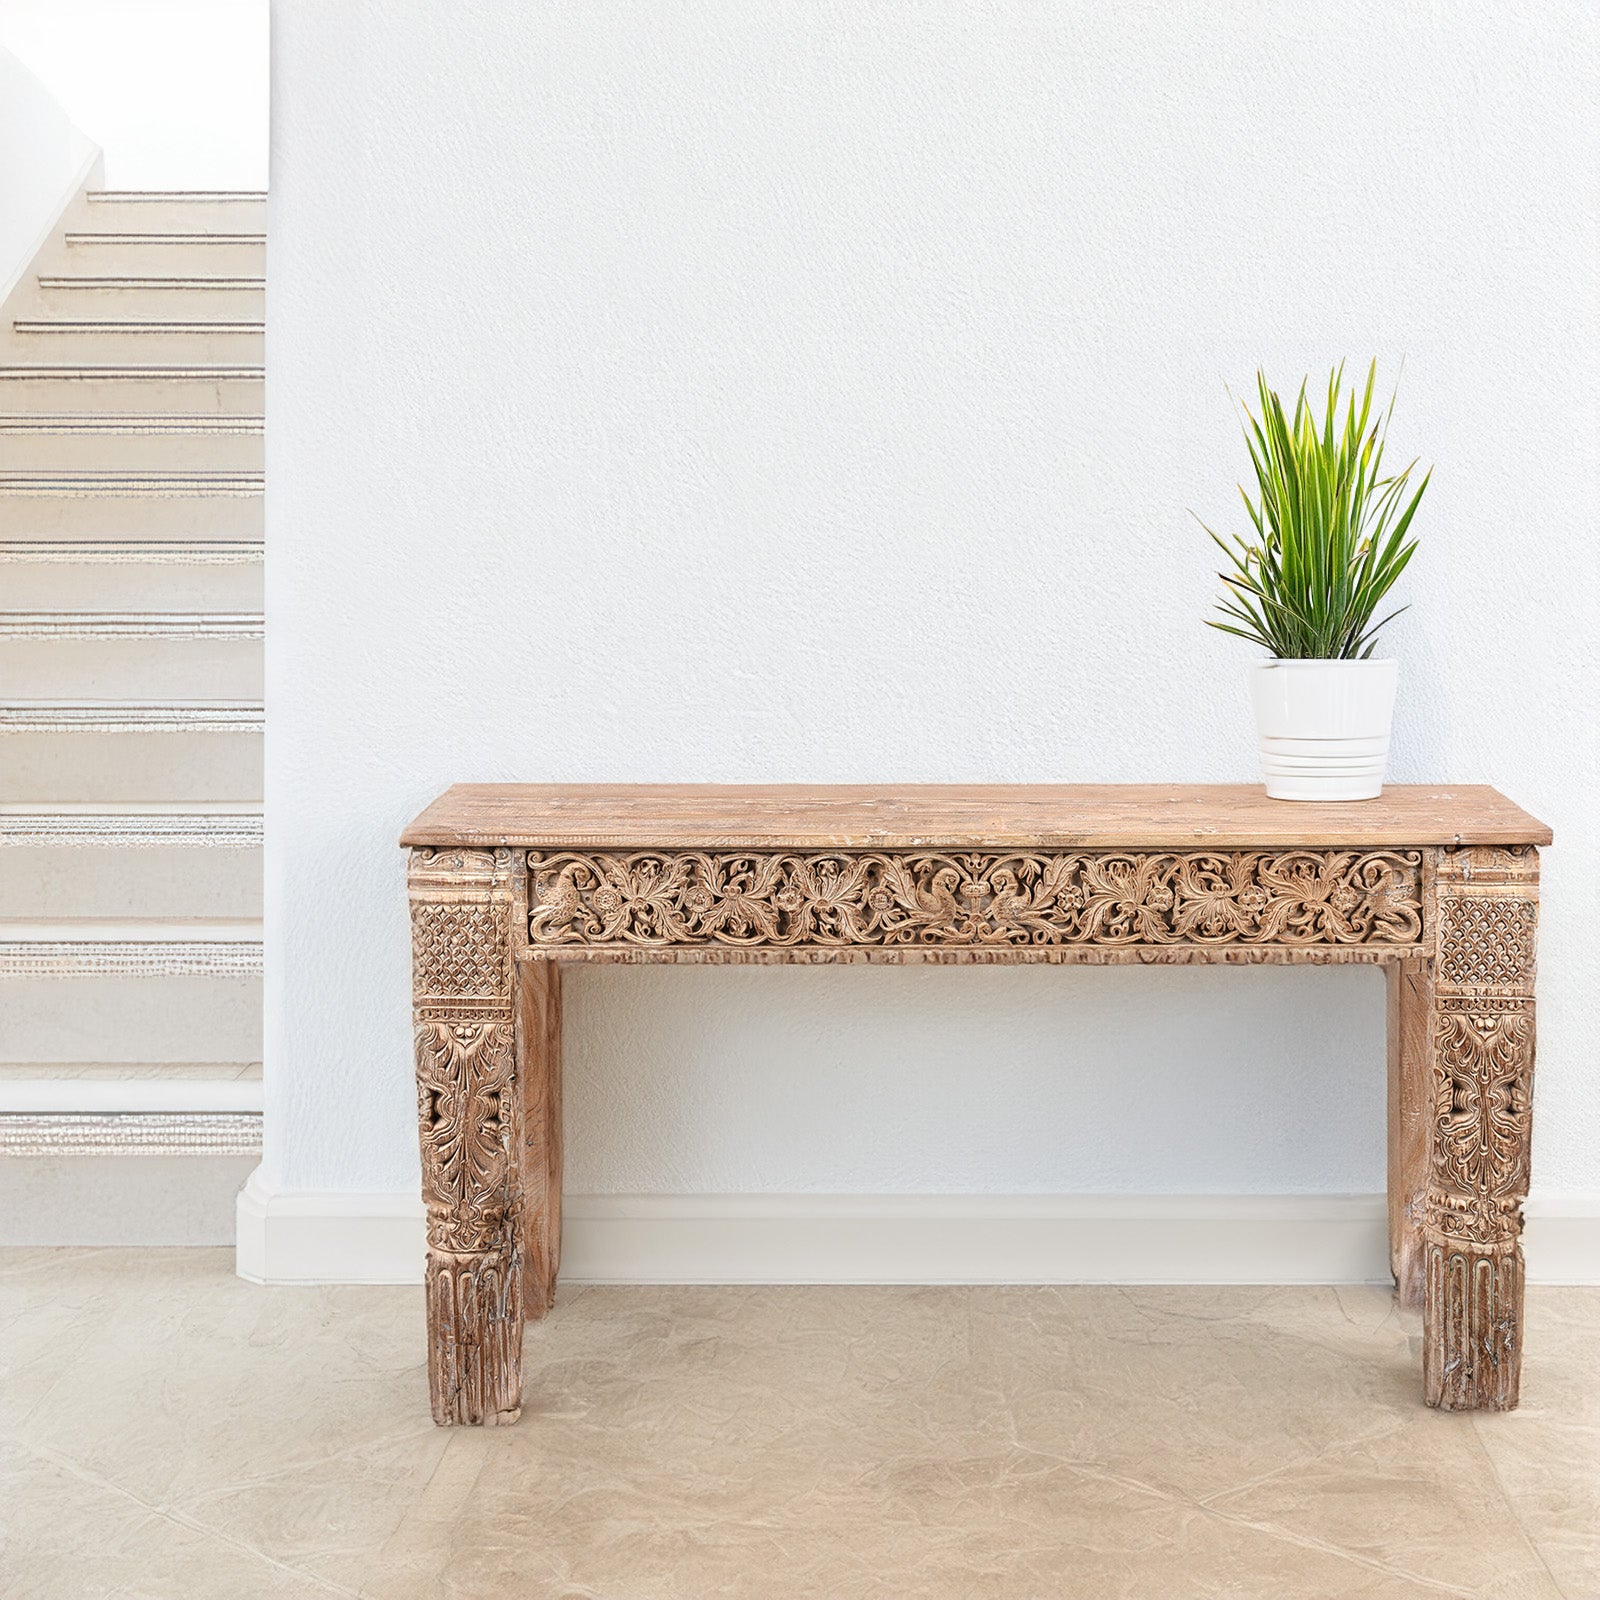 Reclaimed Teakwood Console Table With Painted Finish | Indigo Antiques